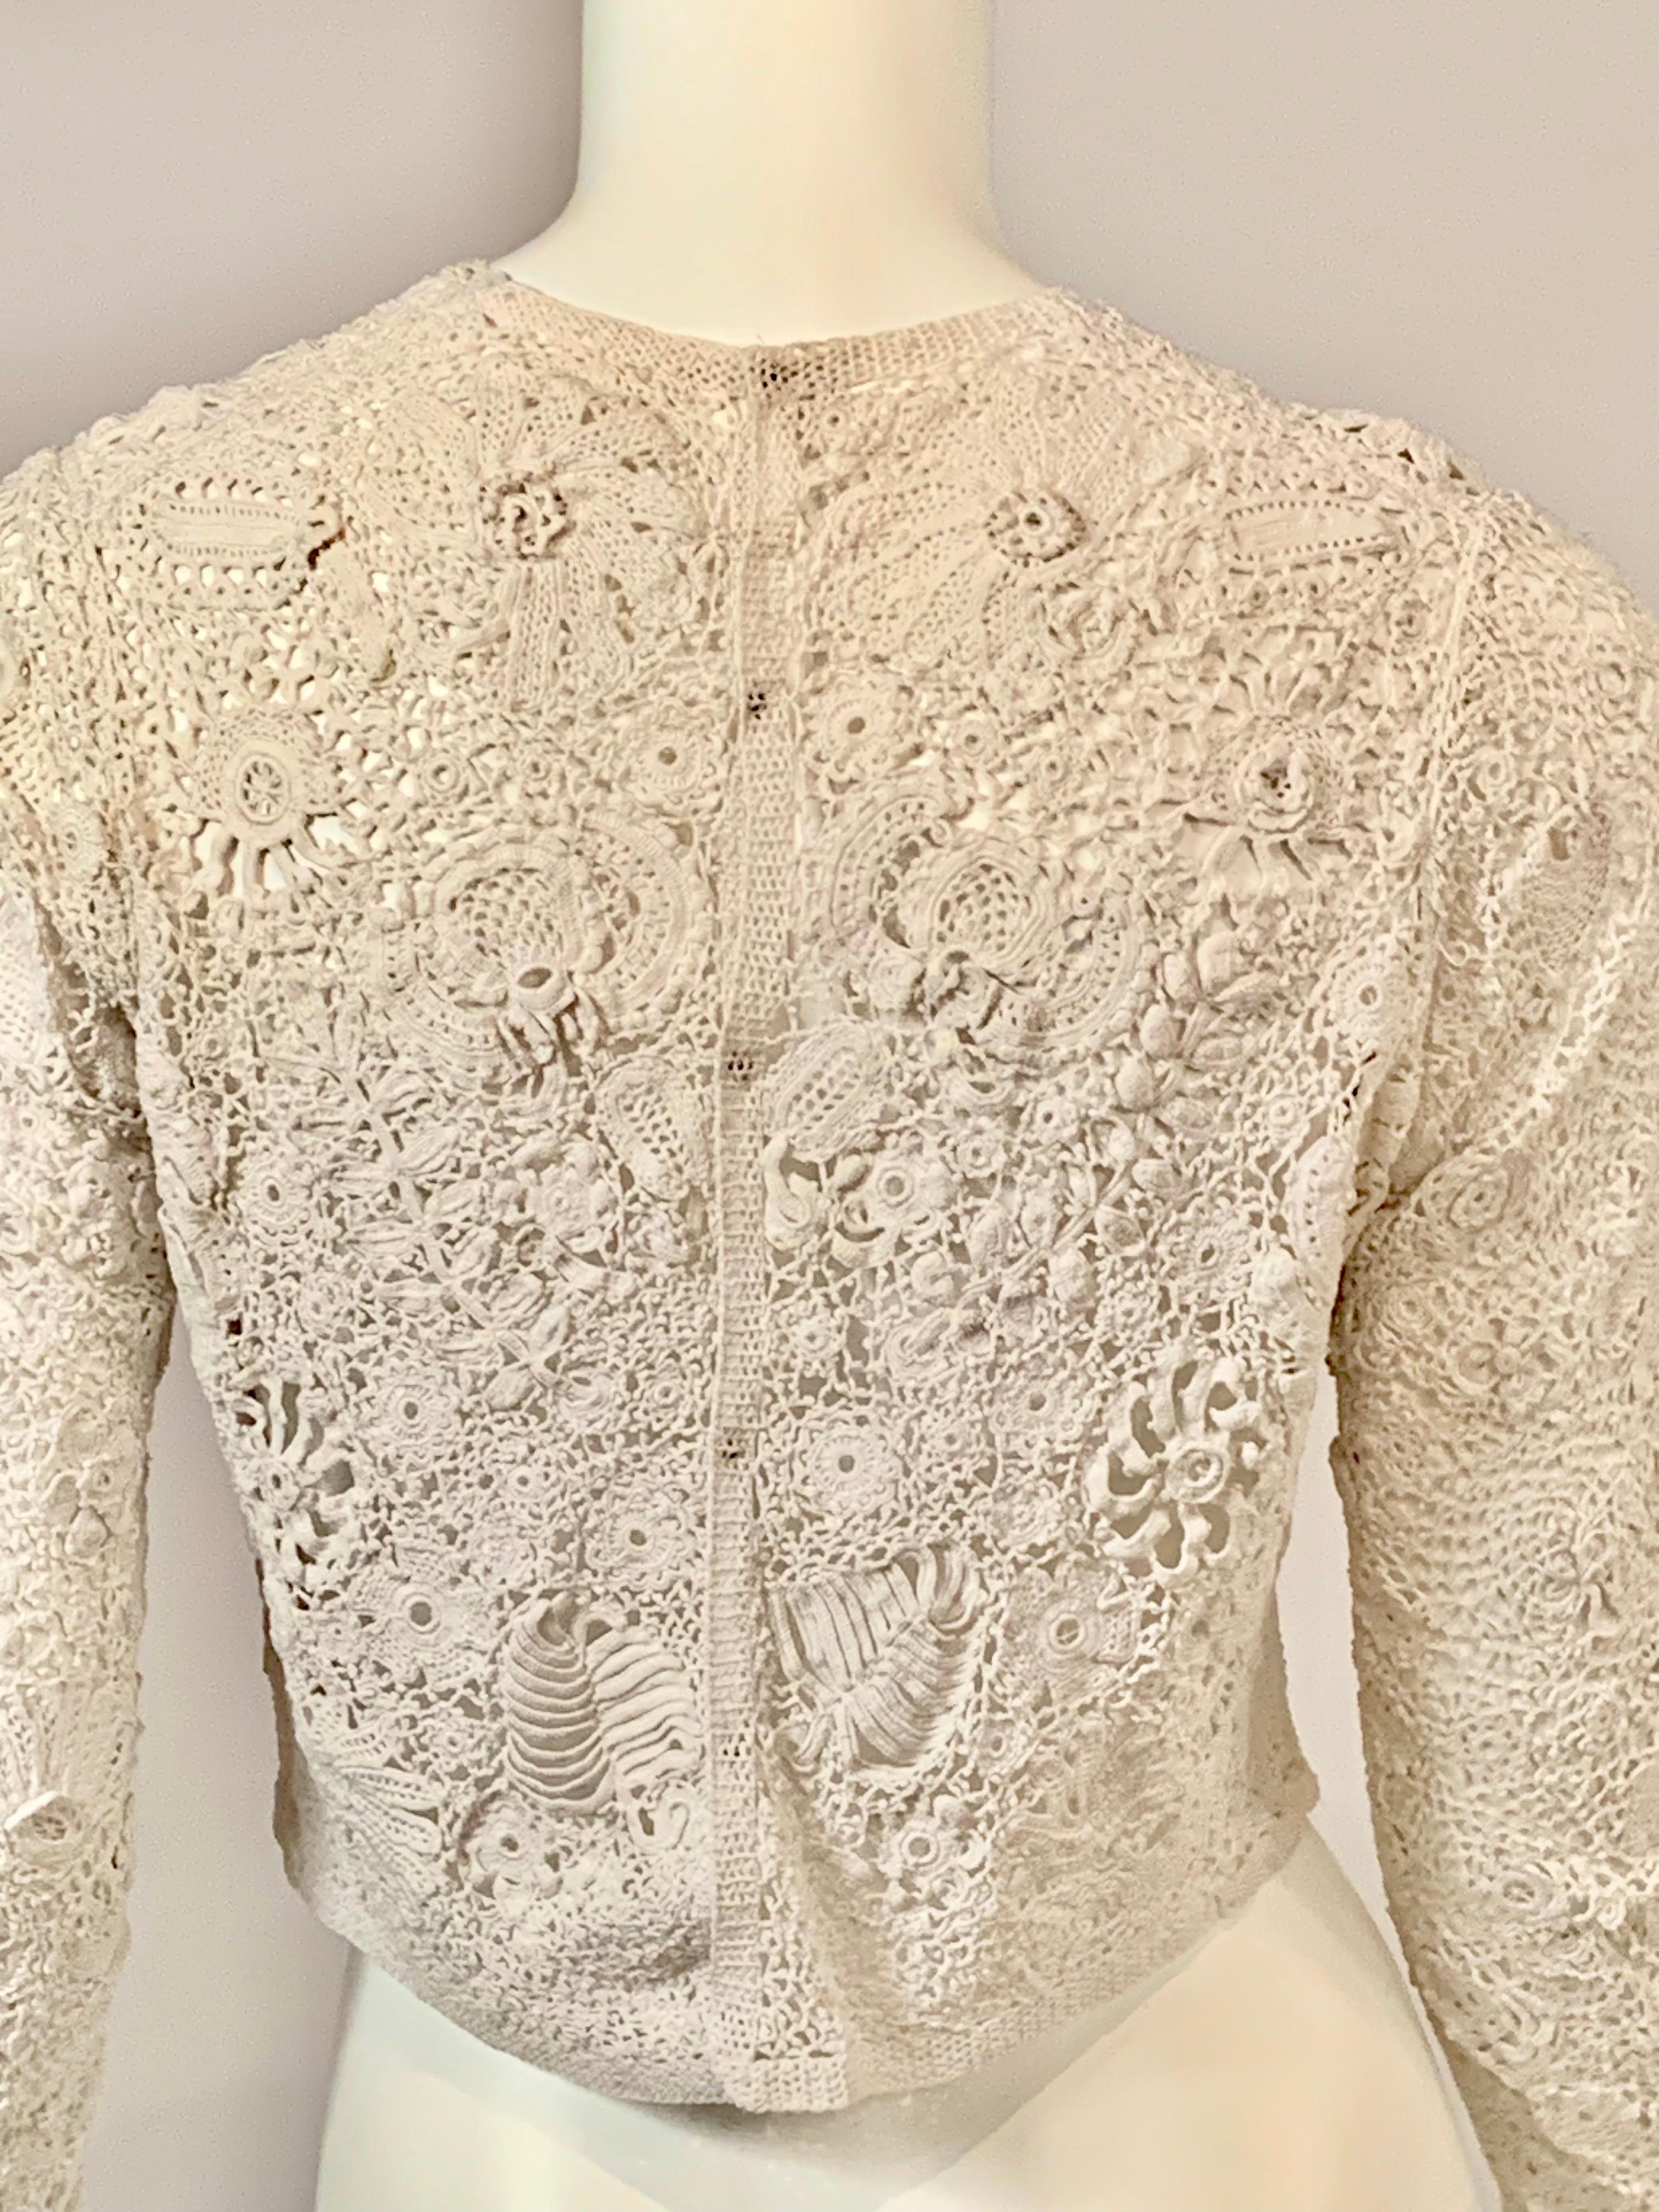 Antique Hand Crocheted Irish Lace Blouse with Flowers and Shamrocks 10